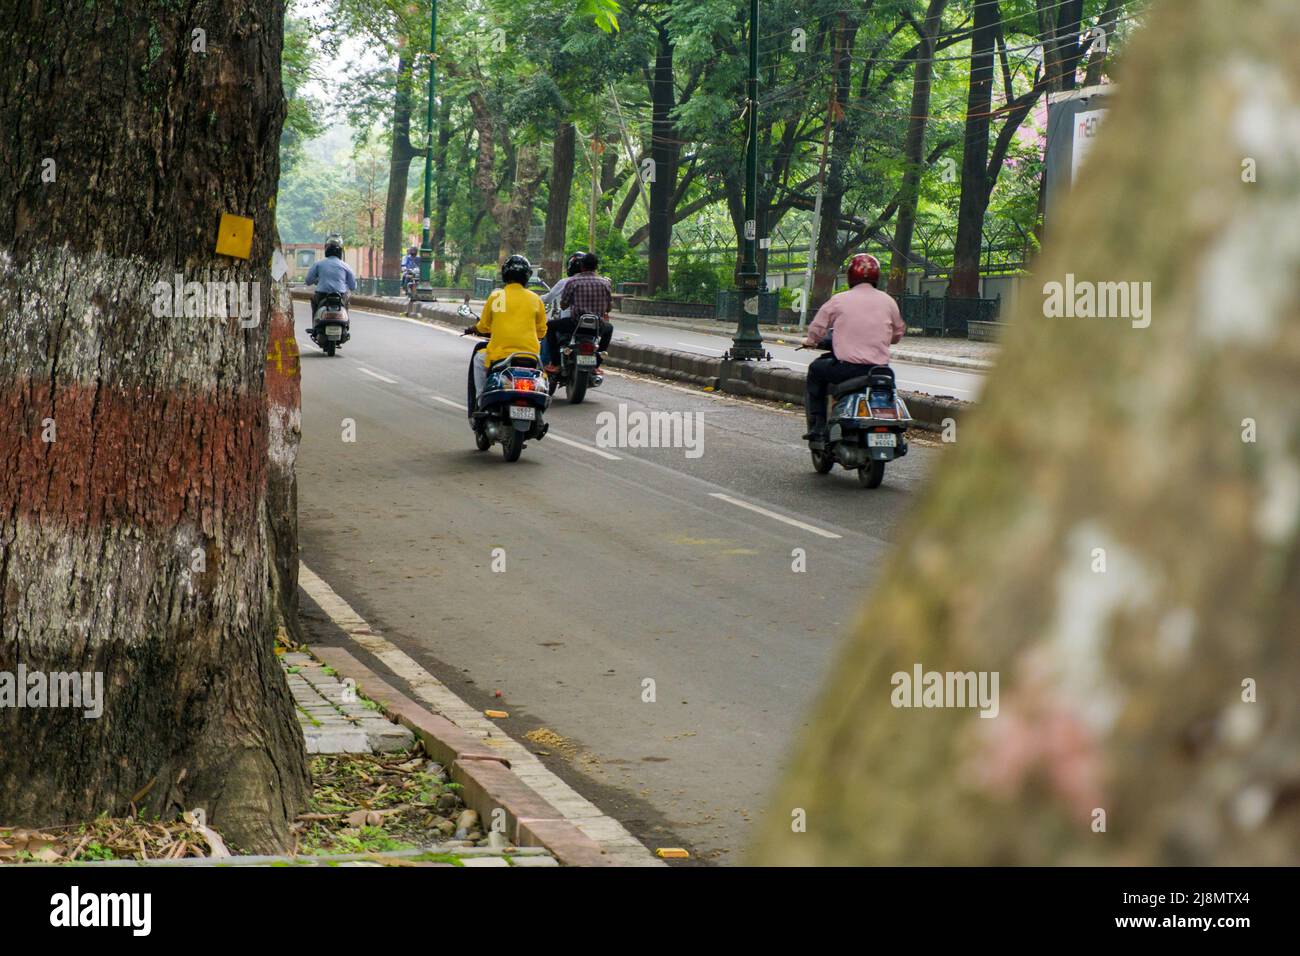 29th June 2020.Uttarakhand, India. Fast moving two wheelers in the city of dehradun, India. Stock Photo